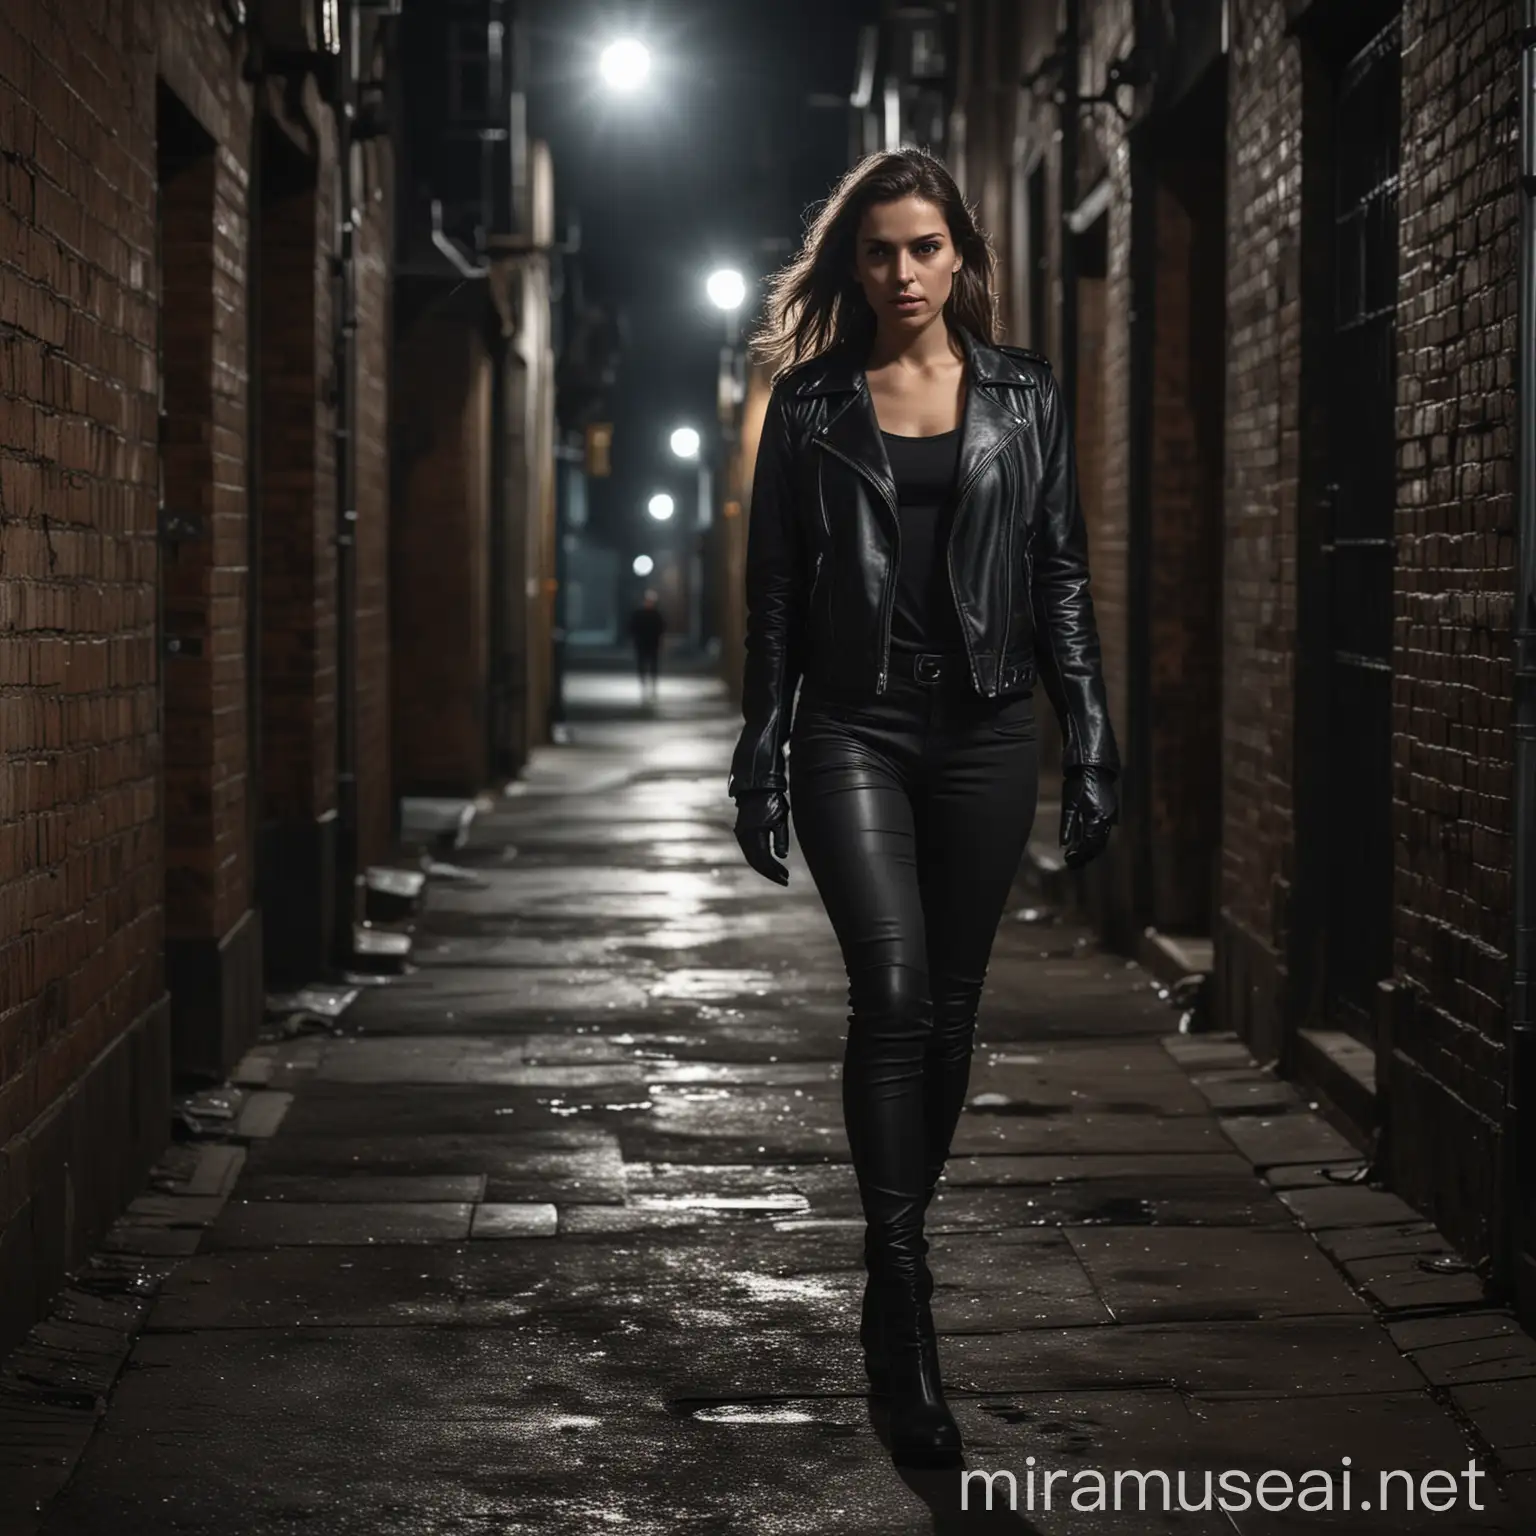 A realistic photo of a young woman, wearing a black leather jacket gloves and pants, walking at night in a dark alley, dramatic lighting